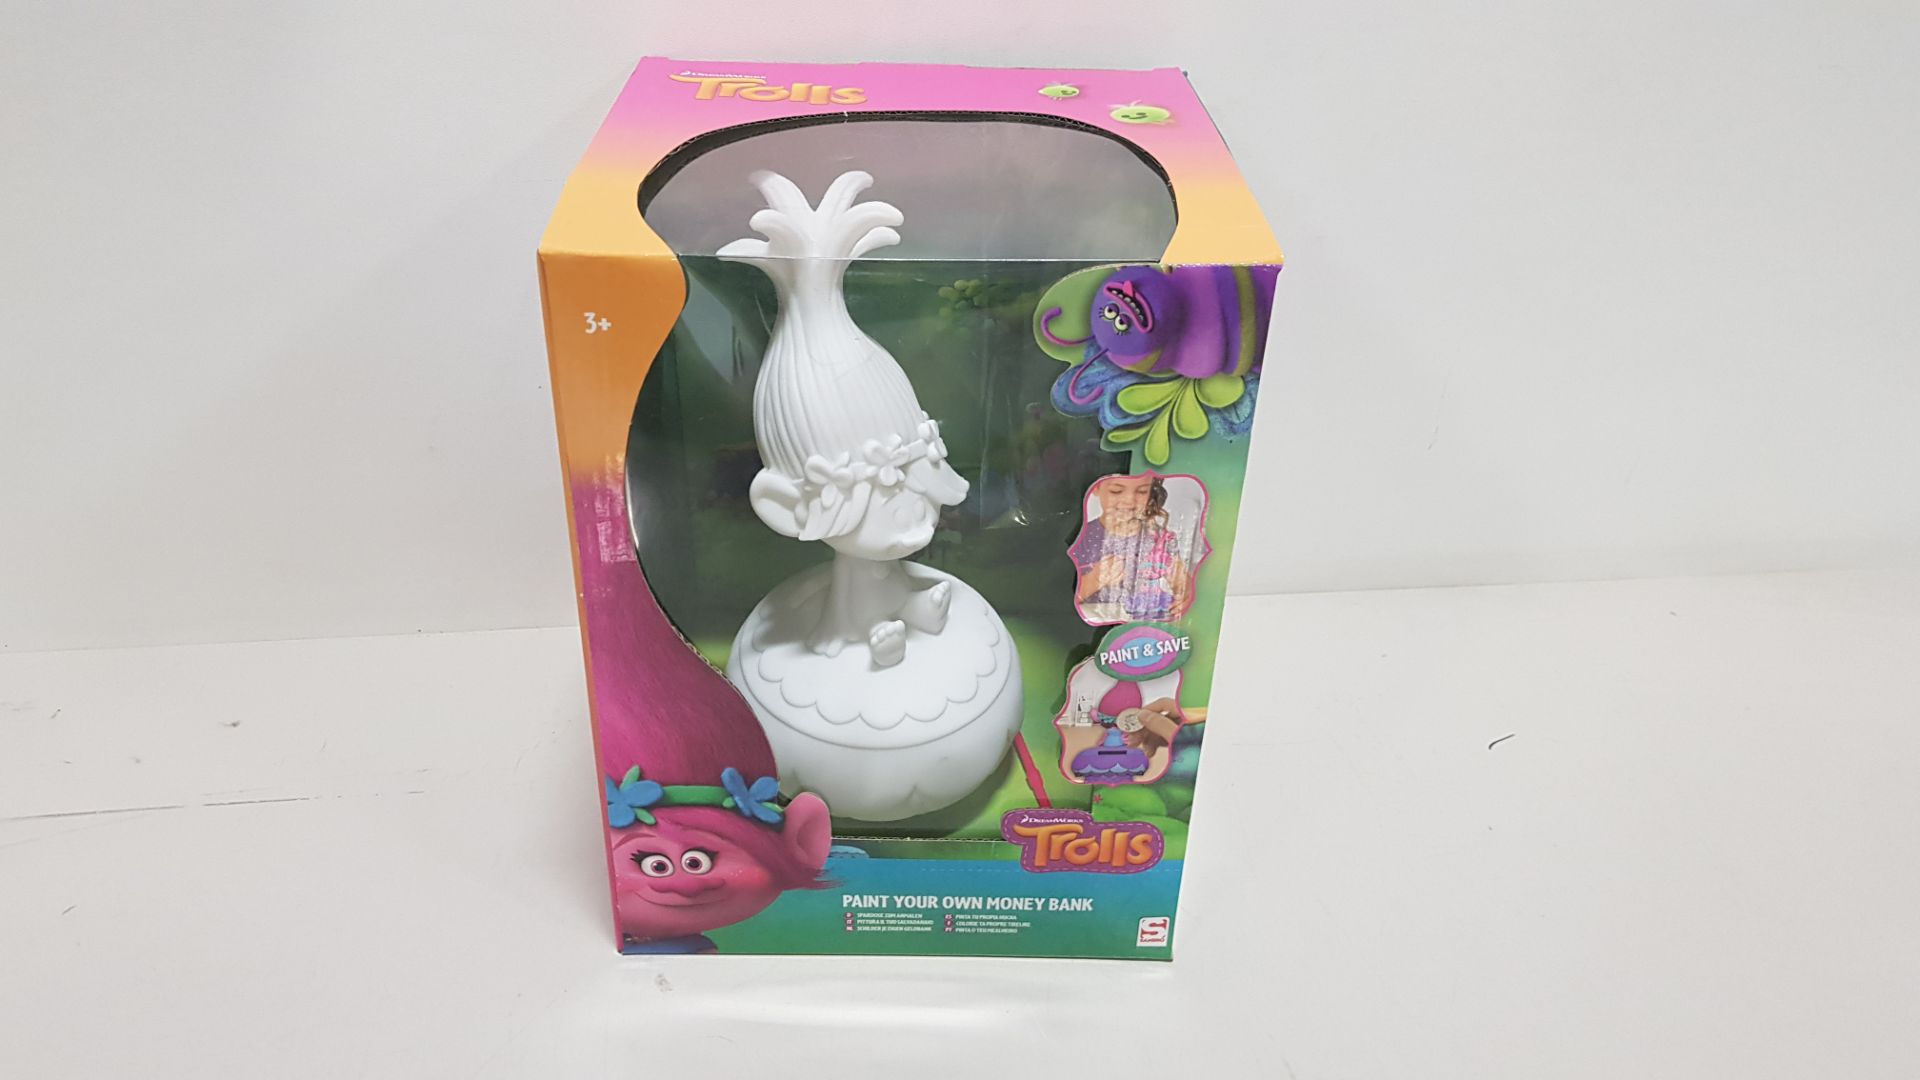 23 X BRAND NEW TROLLS PAINT YOUR OWN MONEY BANK - INCLUDES 1 FIGURE, 1 BRUSH AND 5 PAINTS IN VARIOUS